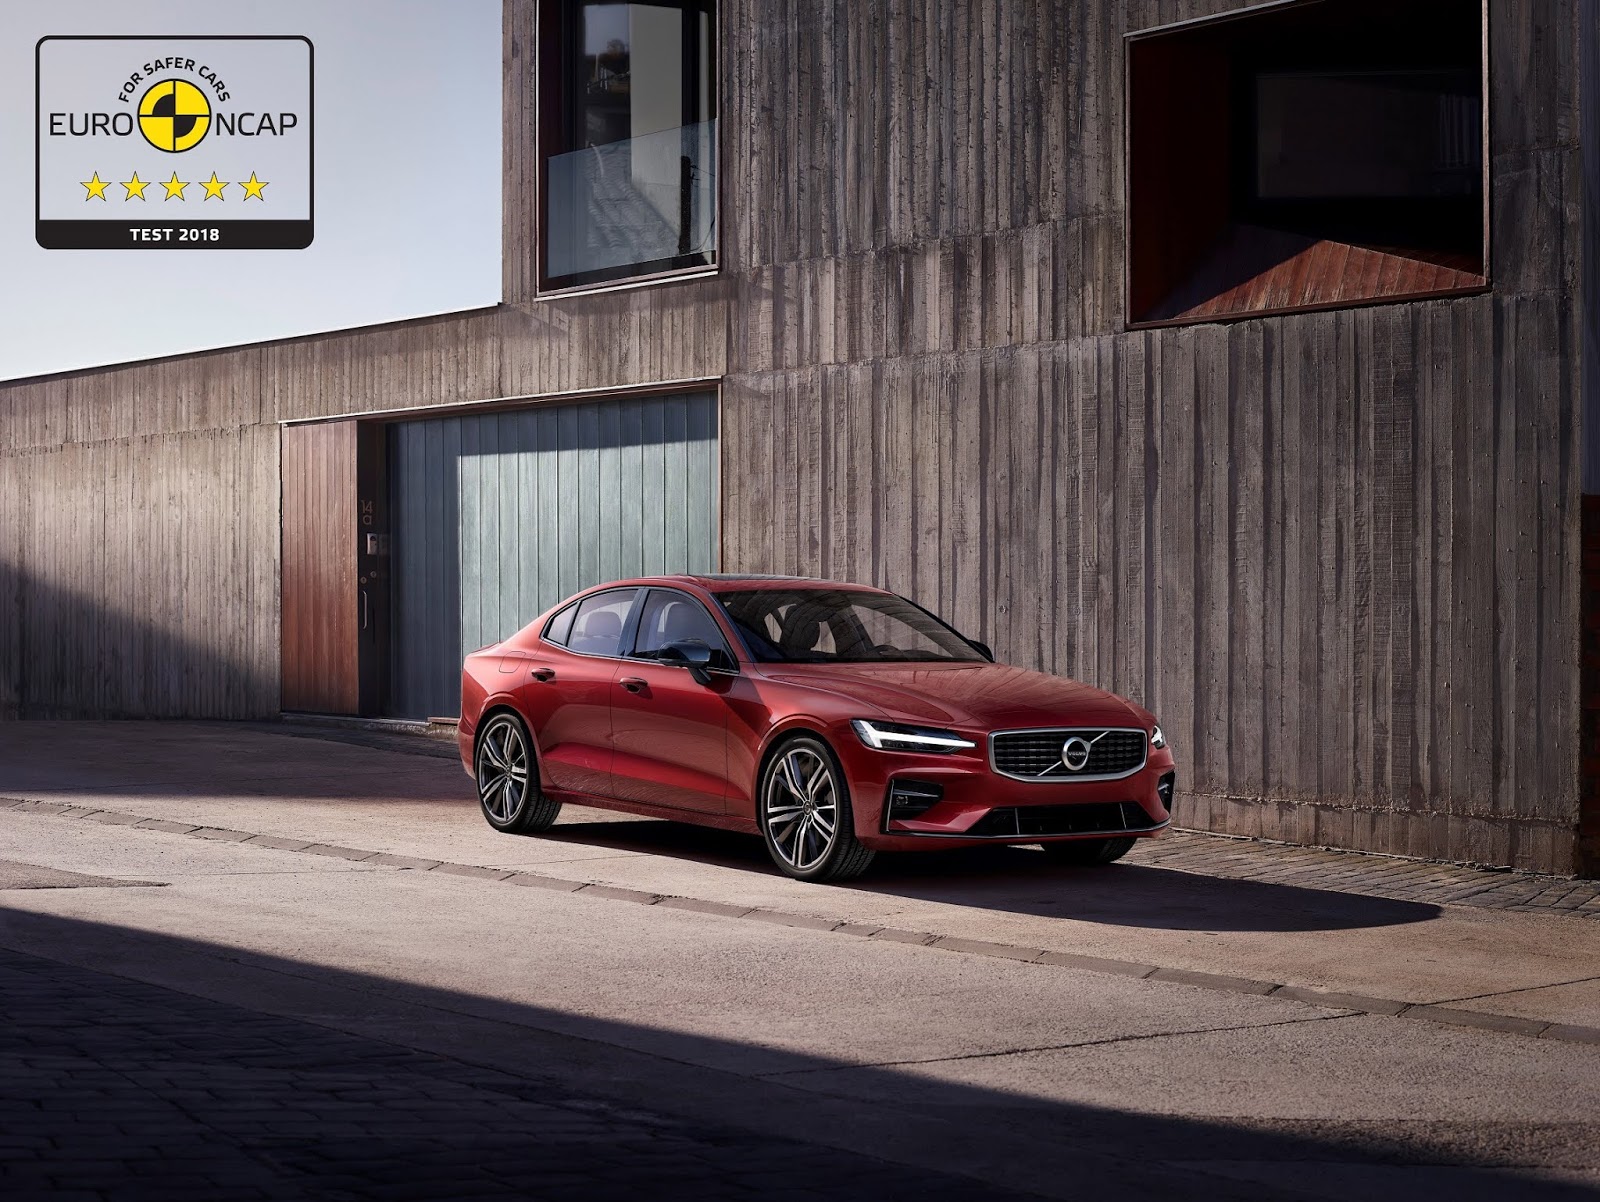 246534 Volvo S60 and V60 secure 5 star safety rating by Euro NCAP2B1 Συνεχίζουν το σερί 5 αστέρων τα Volvo S60 και V60